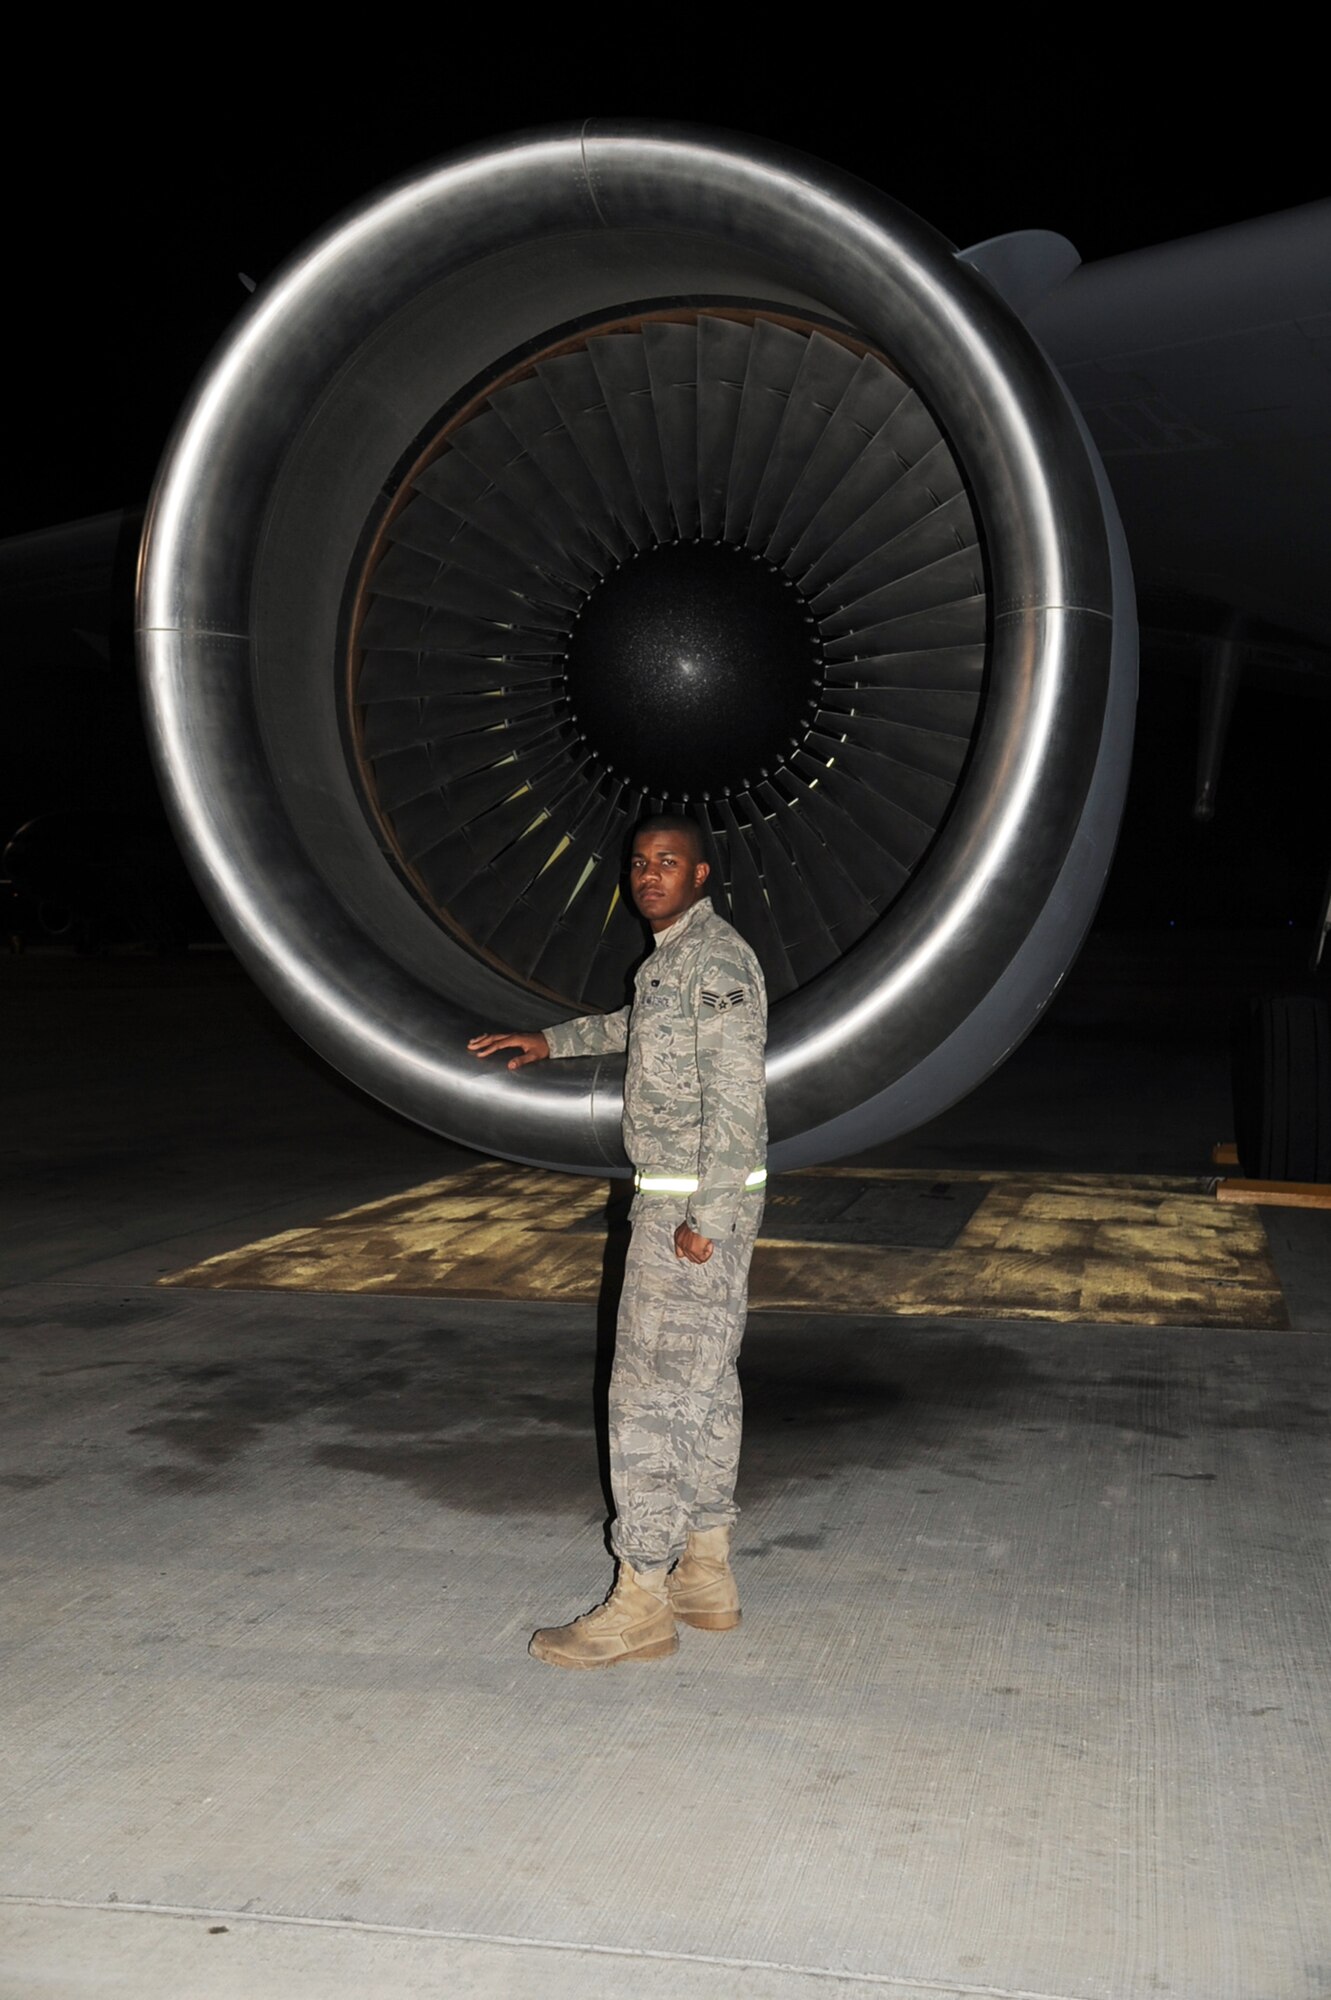 Senior Airman Justin Lassiter is a KC-10 Extender aerospace propulsion journeyman deployed with the 380th Expeditionary Aircraft Maintenance Squadron at a non-disclosed base in Southwest Asia. Here he is pictured on Jan. 31, 2010.  His primary mission is to fix and maintain KC-10 aircraft engines and systems. He is on his third deployment with the 380th EAMXS. Airman Lassiter is deployed from the 605th Aircraft Maintenance Squadron at Joint Base McGuire-Dix-Lakehurst, N.J., and his hometown is Wilson, N.C. (U.S. Air Force Photo/Master Sgt. Scott T. Sturkol/Released)